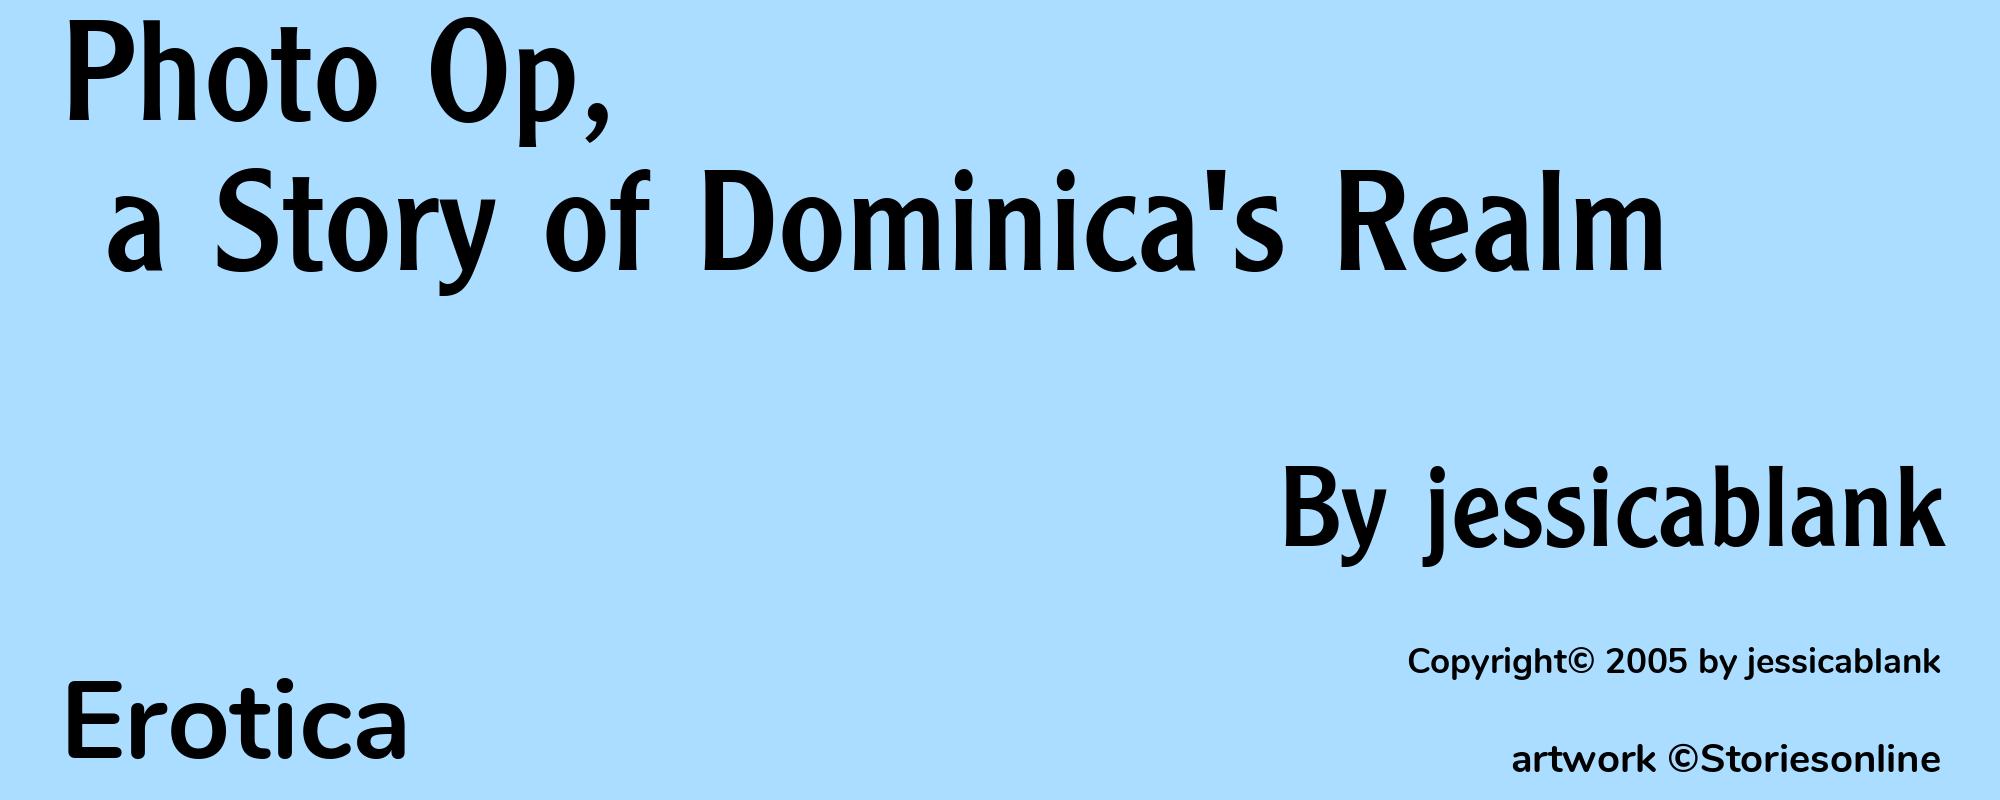 Photo Op, a Story of Dominica's Realm - Cover